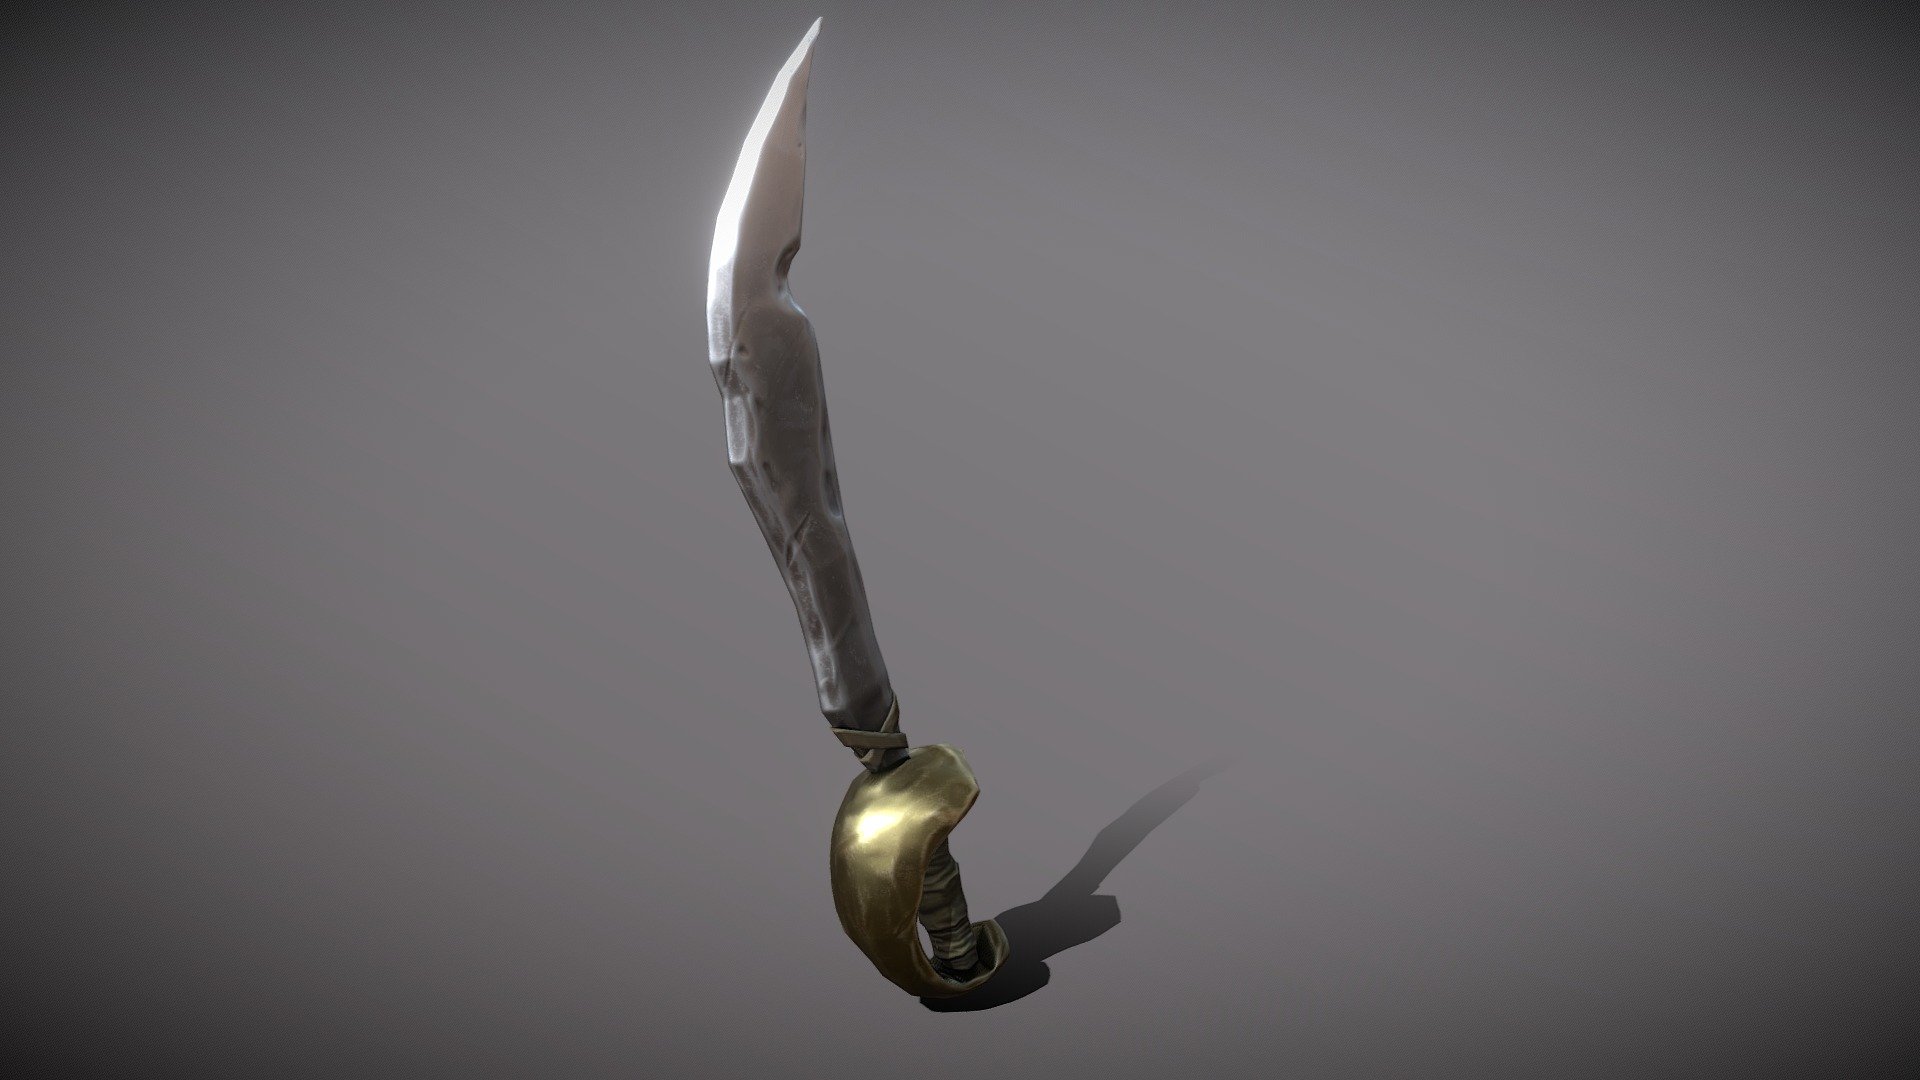 Stylized pirate cutlass - that probably belongs to the Captain of the pirate crew. Who knows what story that item possess? How many blood have been sheded through its blade and how many treasures have been looted with its help? We will never know - but the sword speaks for itself and guess what you can have it for free! Isnt that wonderfull?!

Modeled in Blender, textured in Substance Painter. Around 1.5k tris. You can use it in commercials projects but remember to credit me and my art :) - Captain's Cutlass - Stylized Pirate Sword - Download Free 3D model by BiscuitEater (@div.andromeda) 3d model